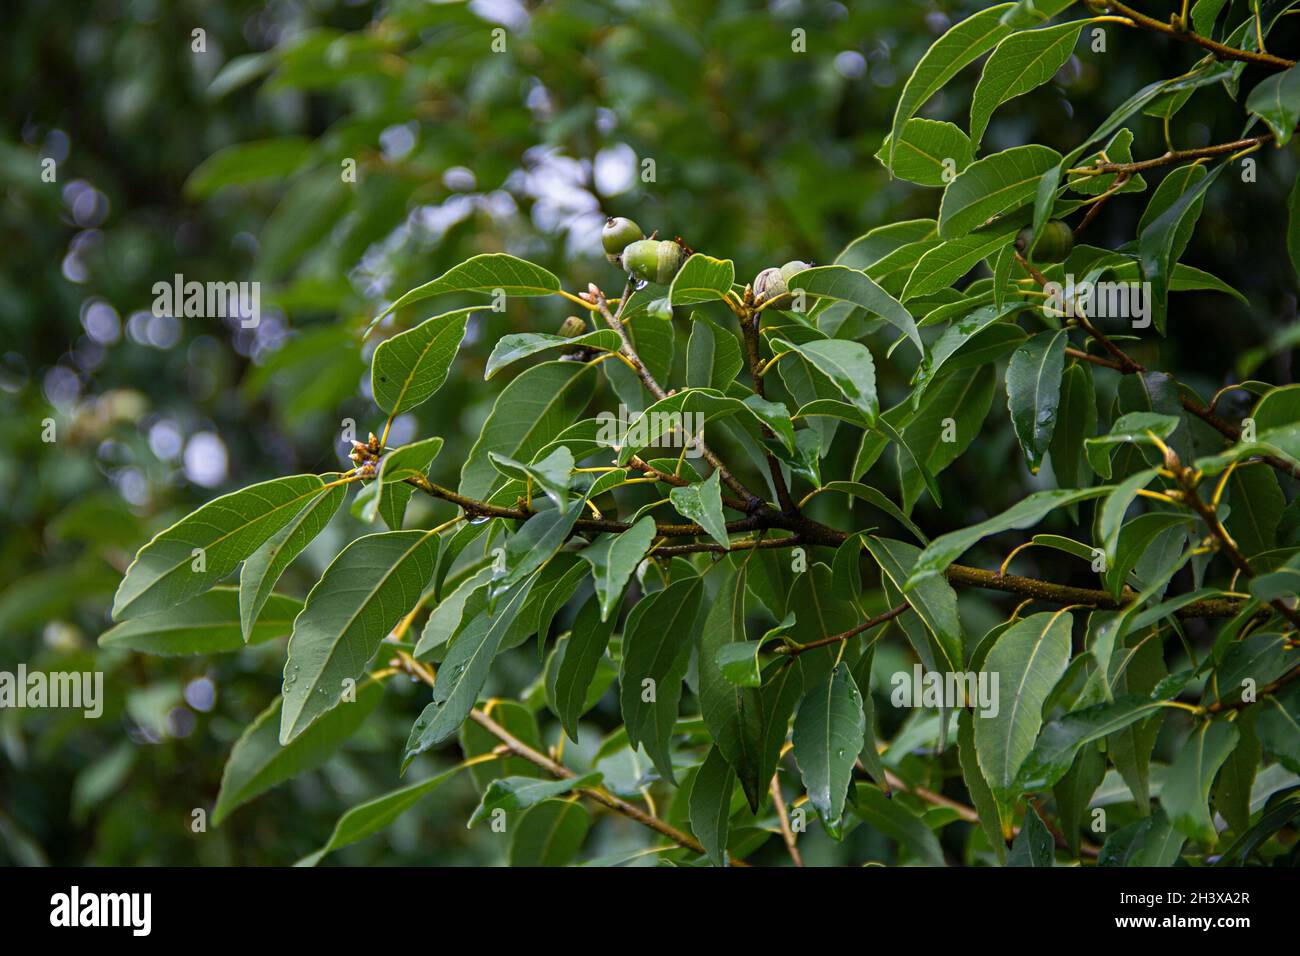 Close-up of green leaves and acorns of Quercus myrsinifolia, commonly called Chinese ring-cupped oak or Japanese white Oak in Sochi arboretum Stock Photo